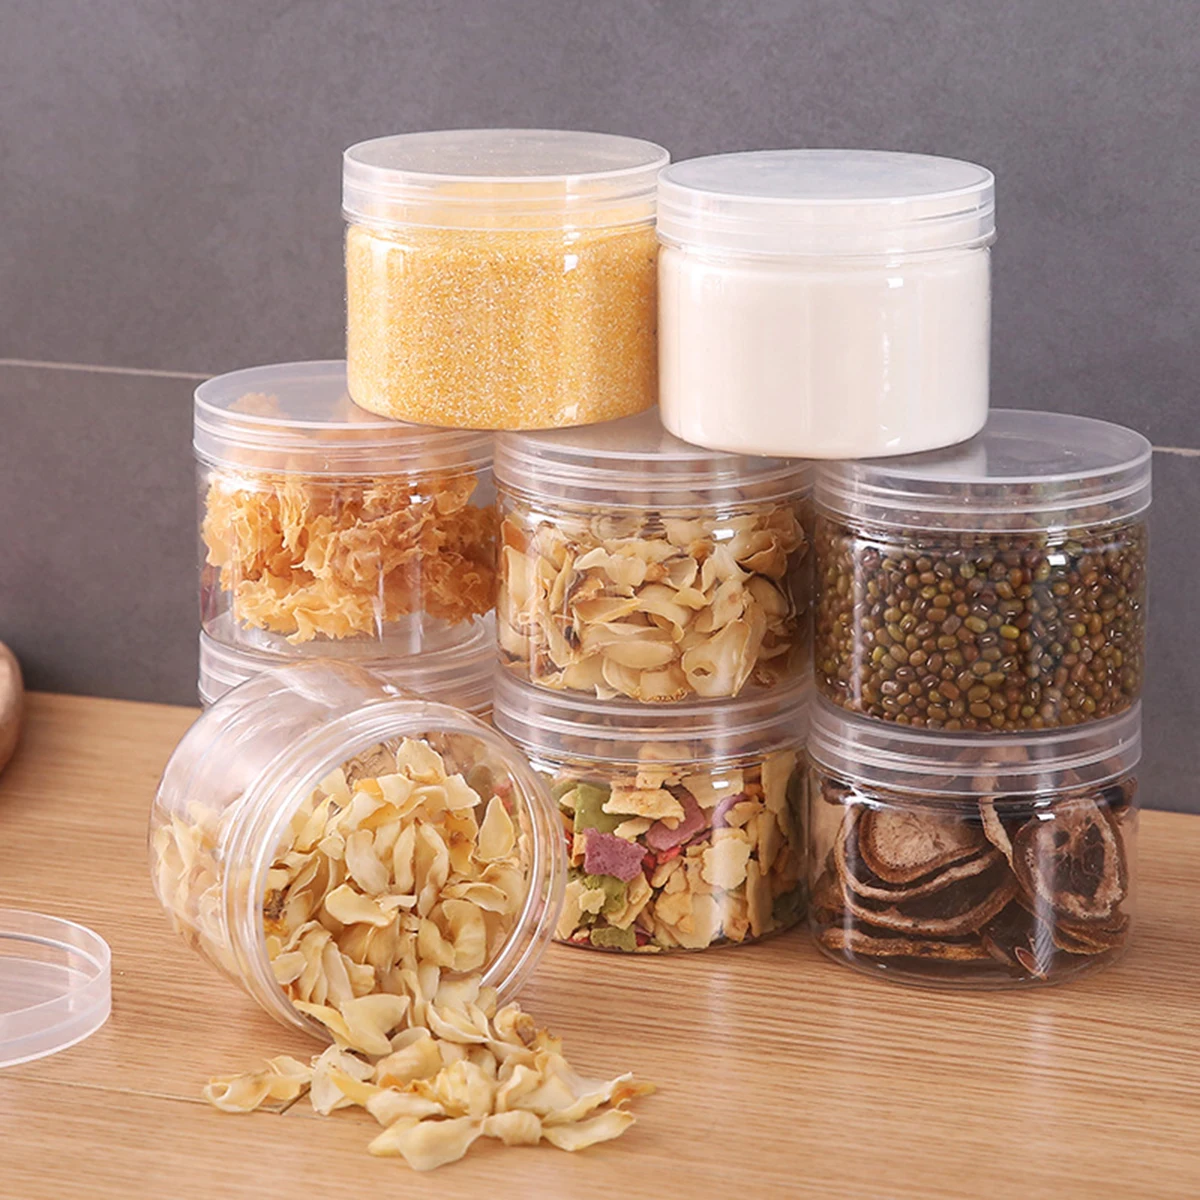 280ml Plastic Storage Spice Jars Set Pots For Groceries Kitchen Spice Storage Food Container Transparent Round Sealed Cans